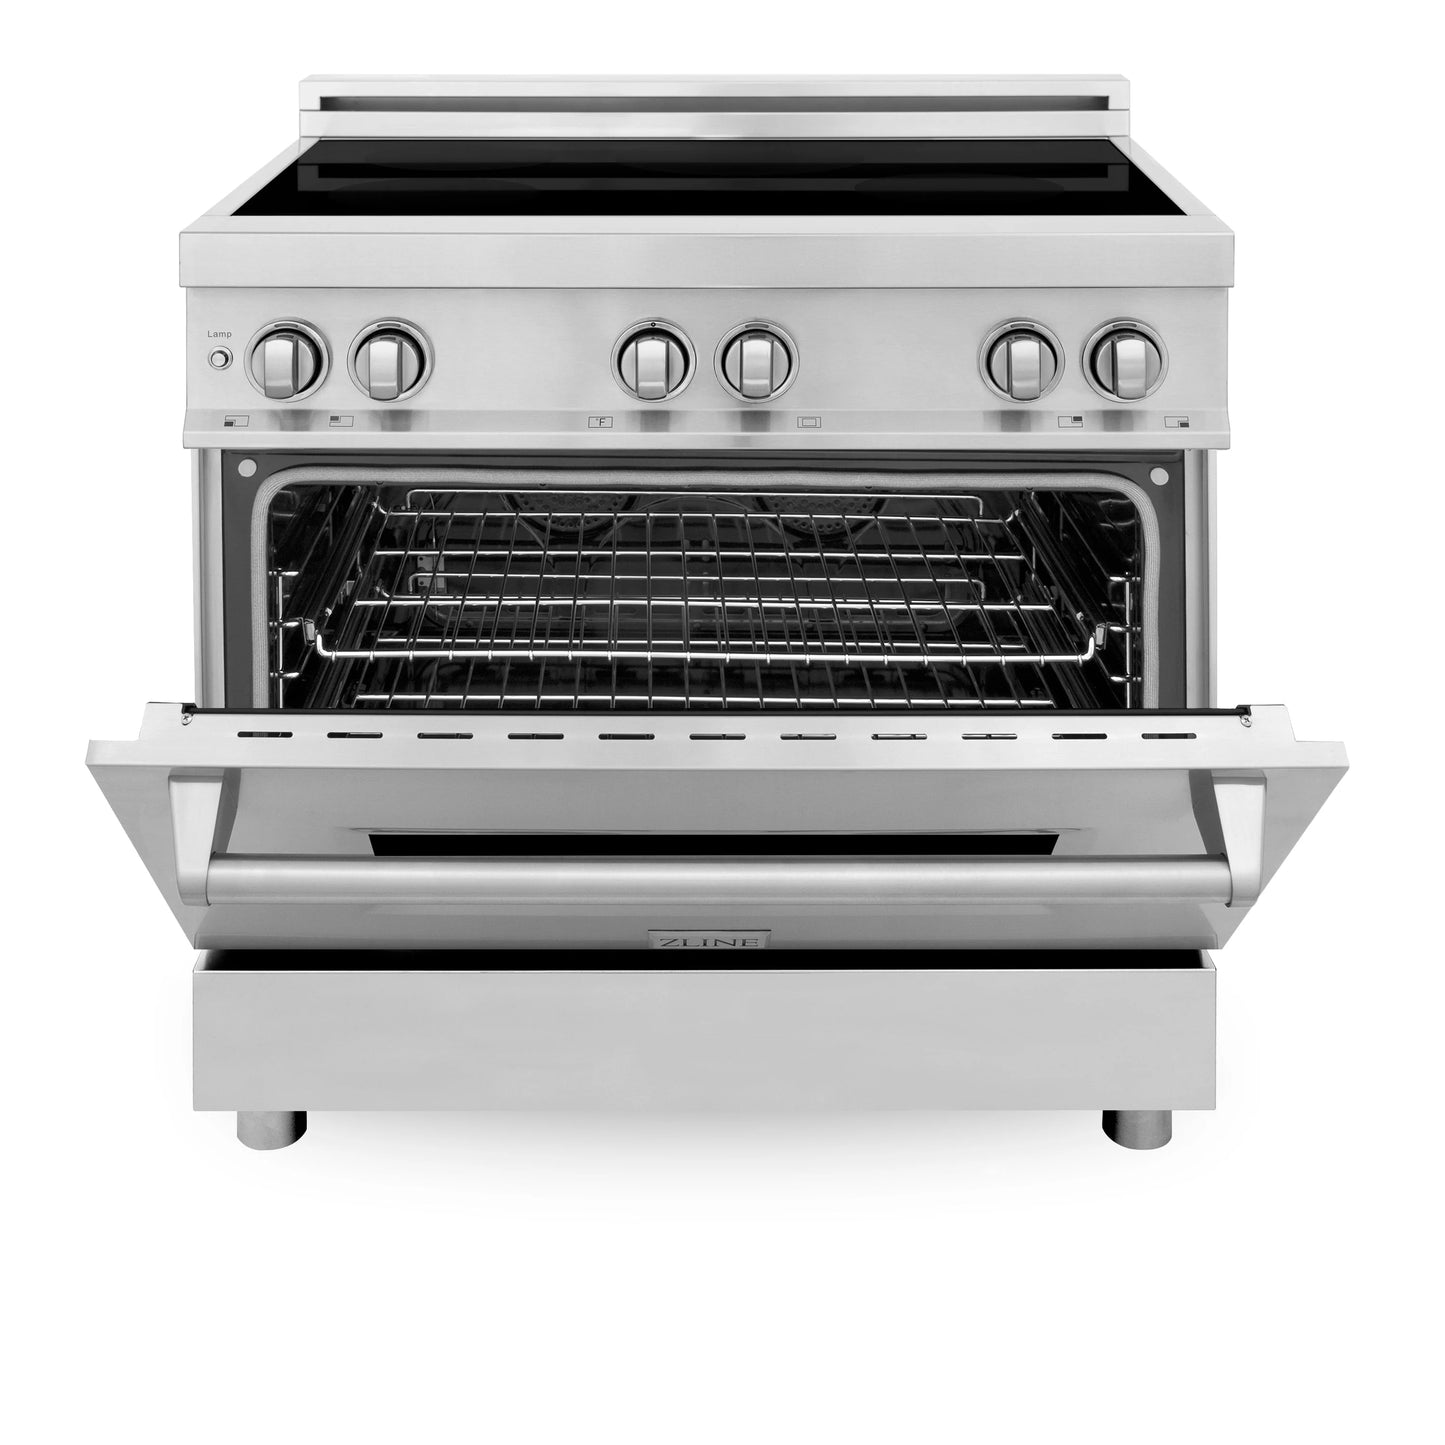 ZLINE 36 in. Induction Range with a 4 Element Stove and Electric Oven (RAIND-36)